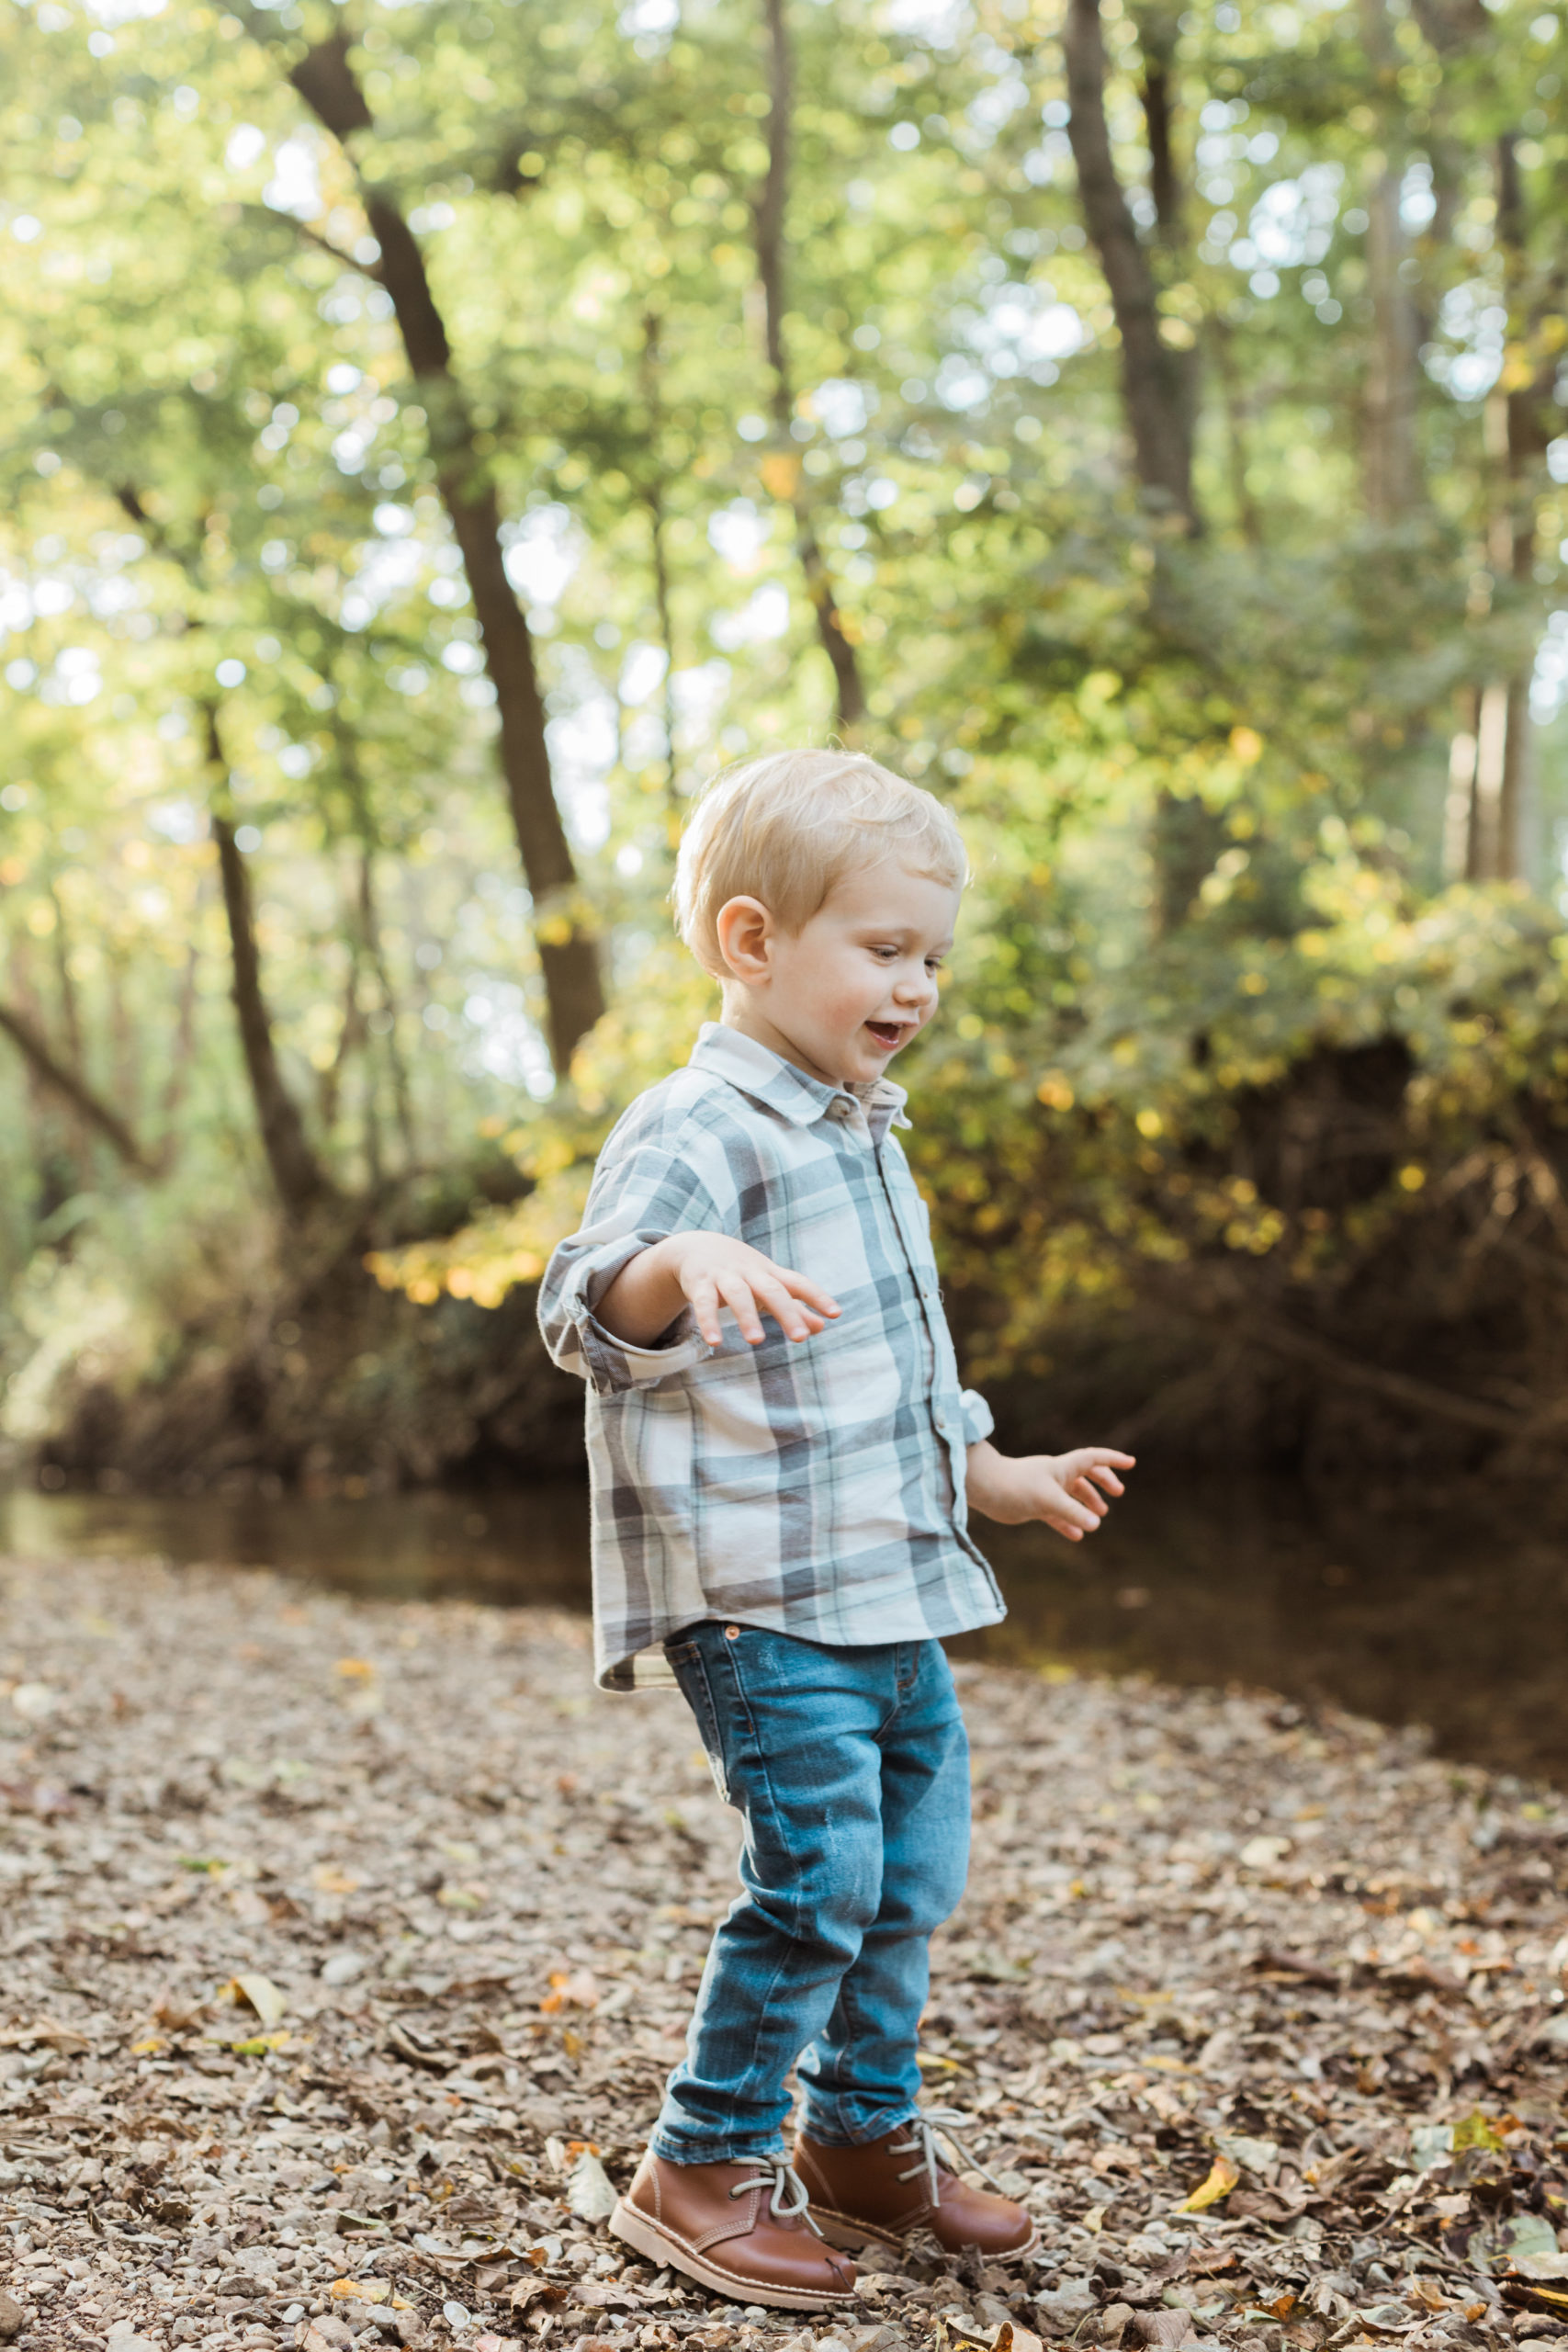 Little boy outdoors looking at fall leaves. Boy wearing jeans and plaid button up.